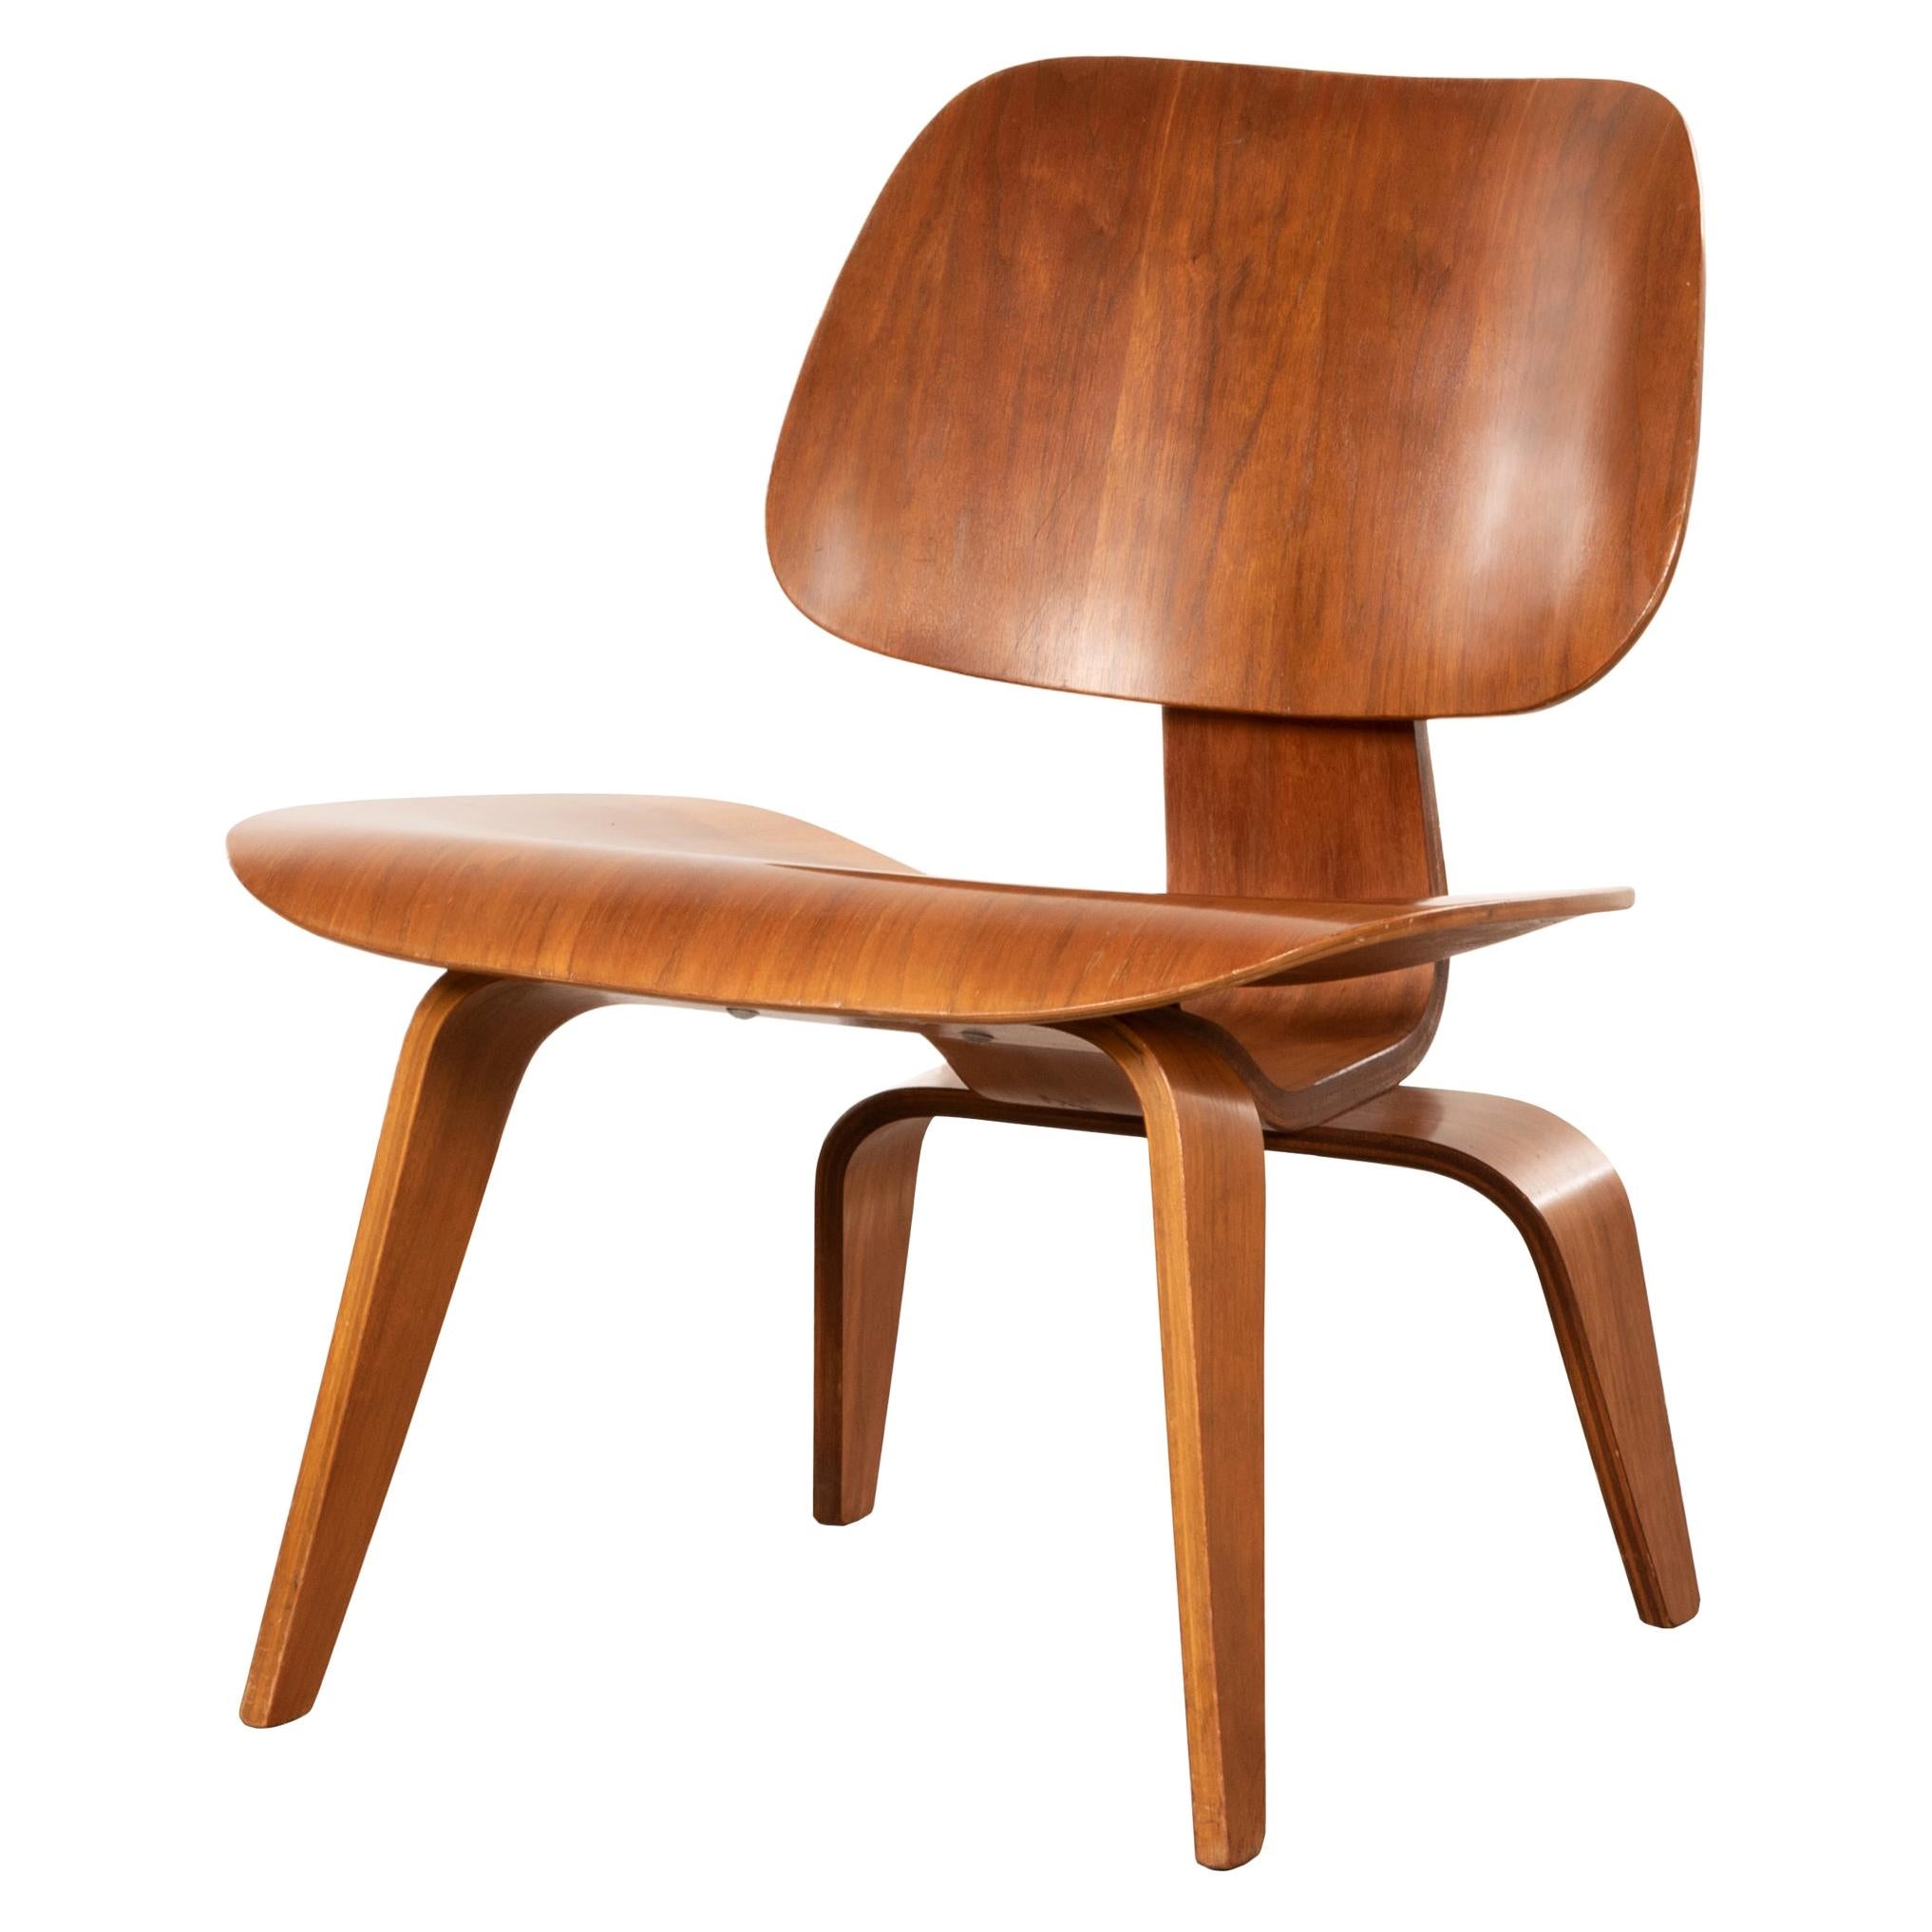 Charles & Ray Eames Early LCW Walnut Lounge Chair for Herman Miller, 1951